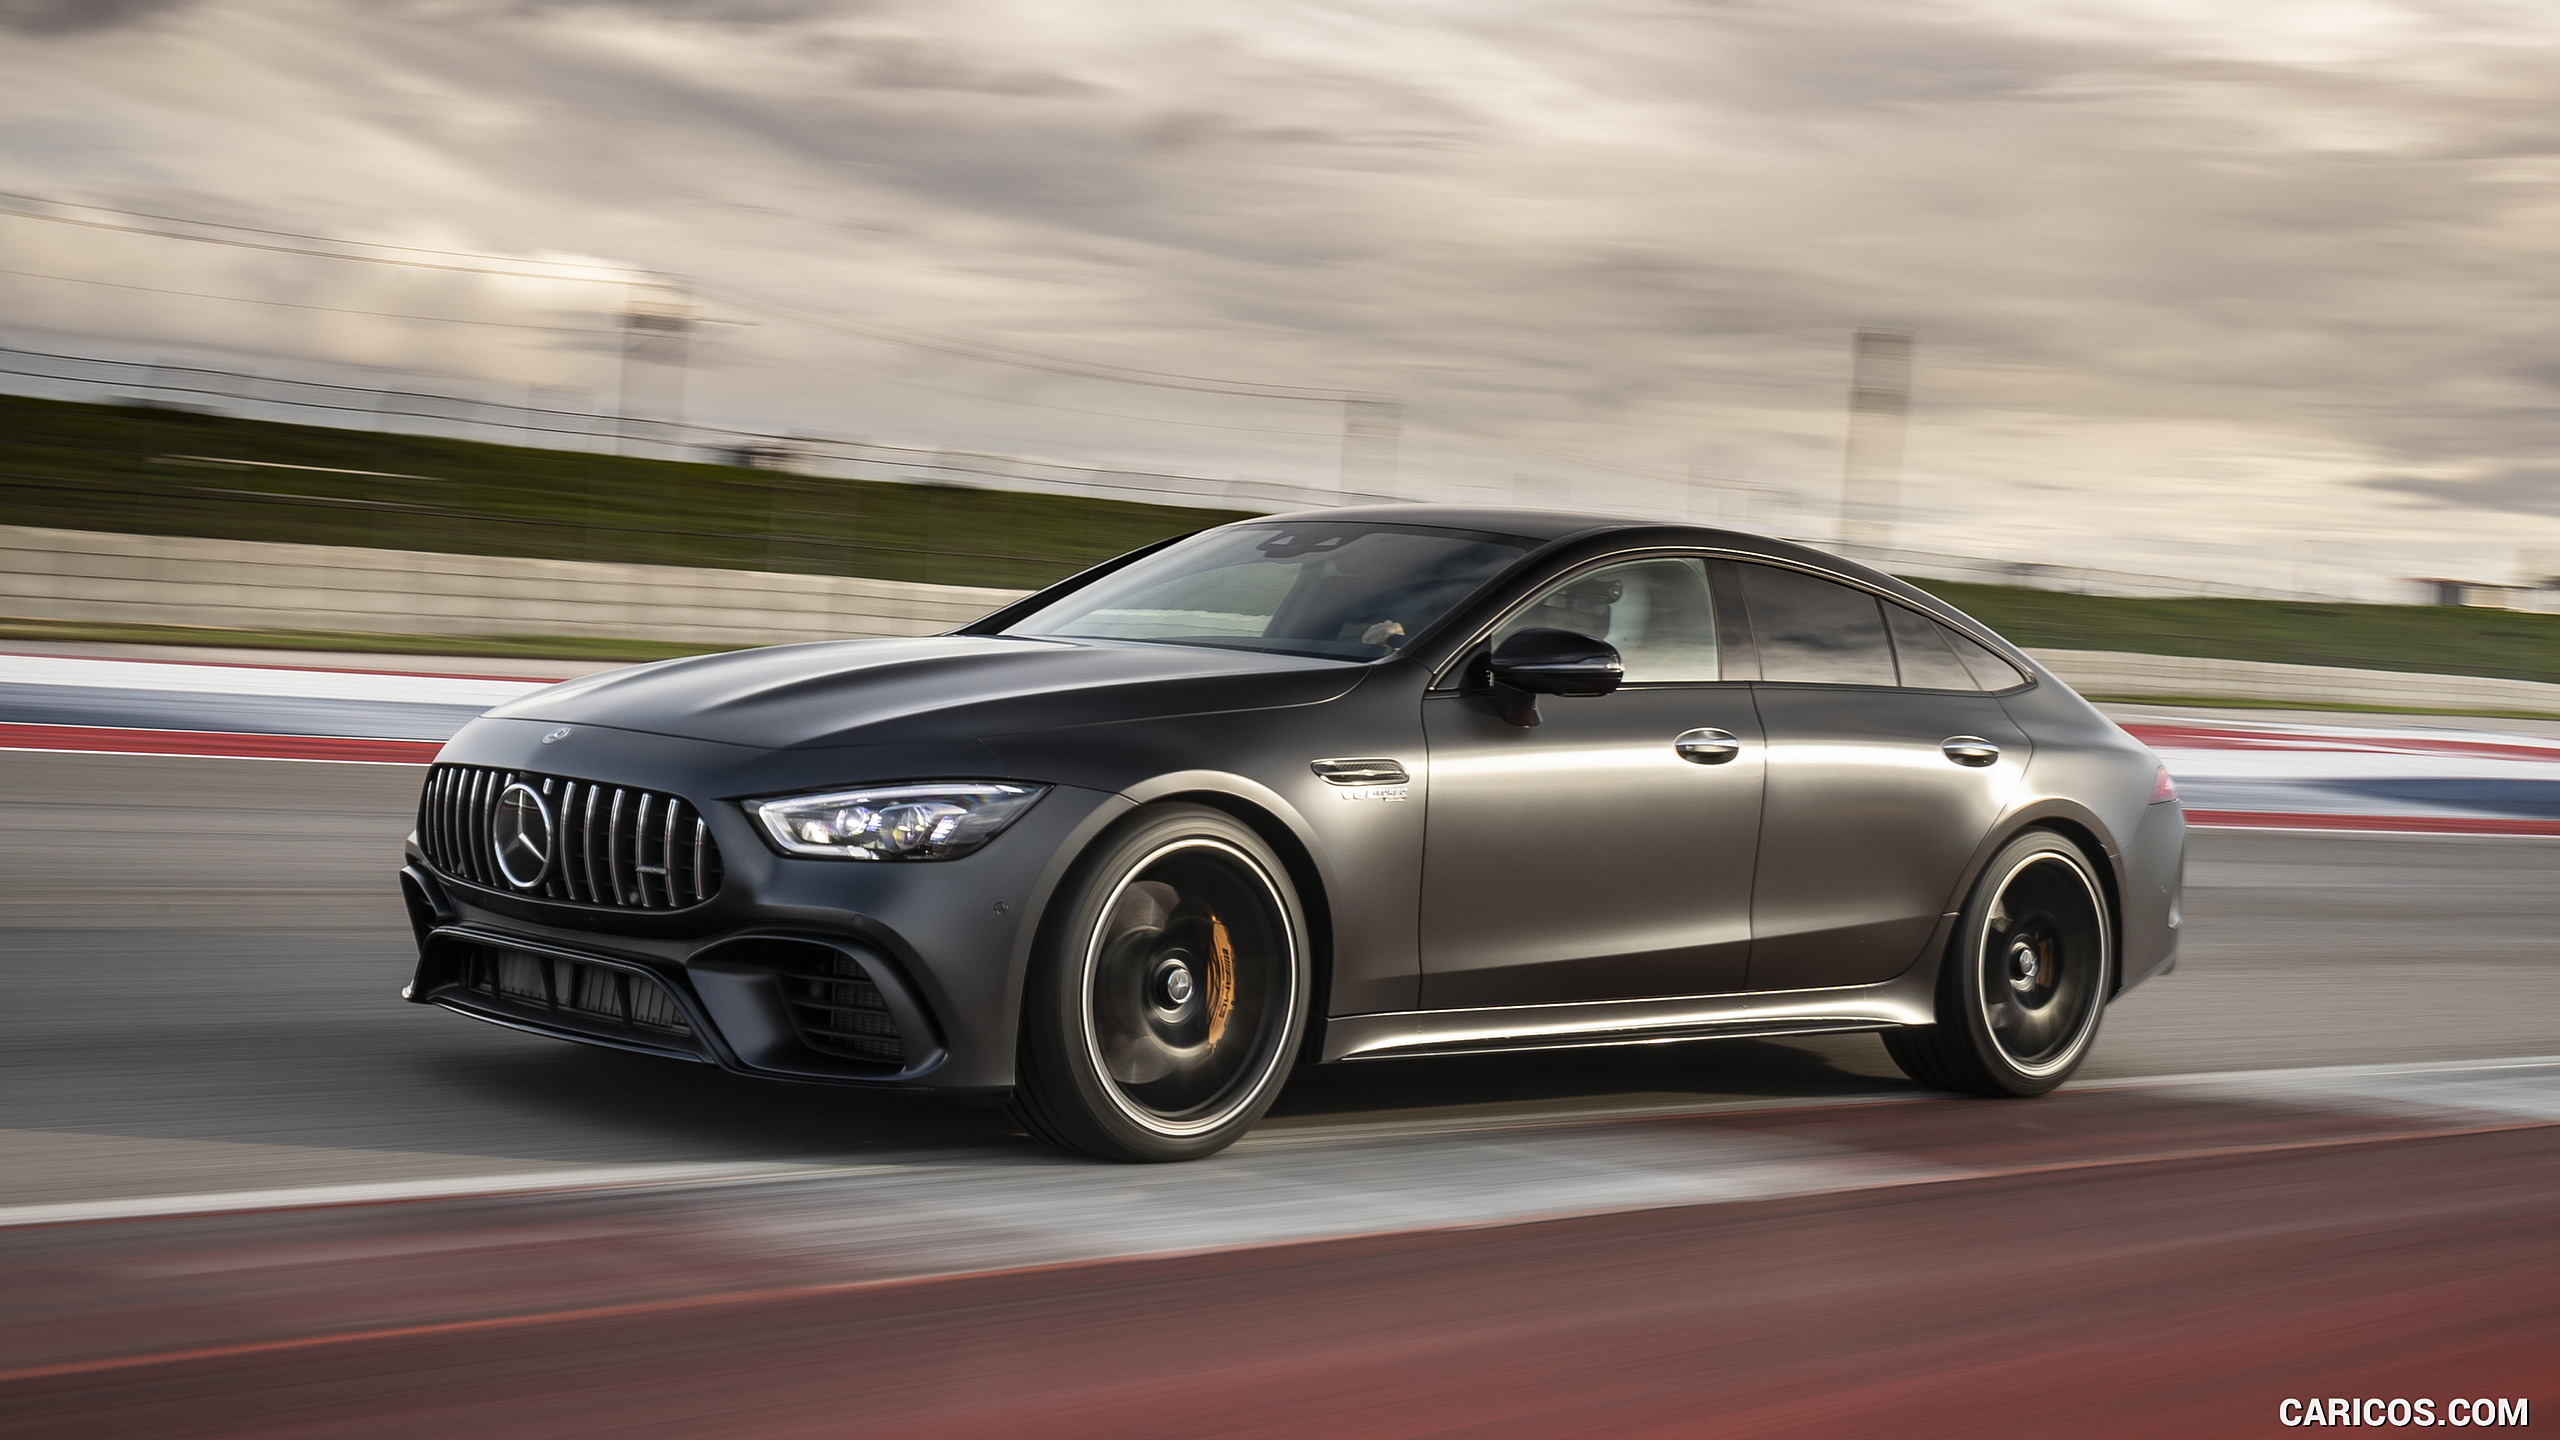 2019 Mercedes-AMG GT 63 S 4MATIC+ 4-Door Coupe - Front Three-Quarter, #175 of 427